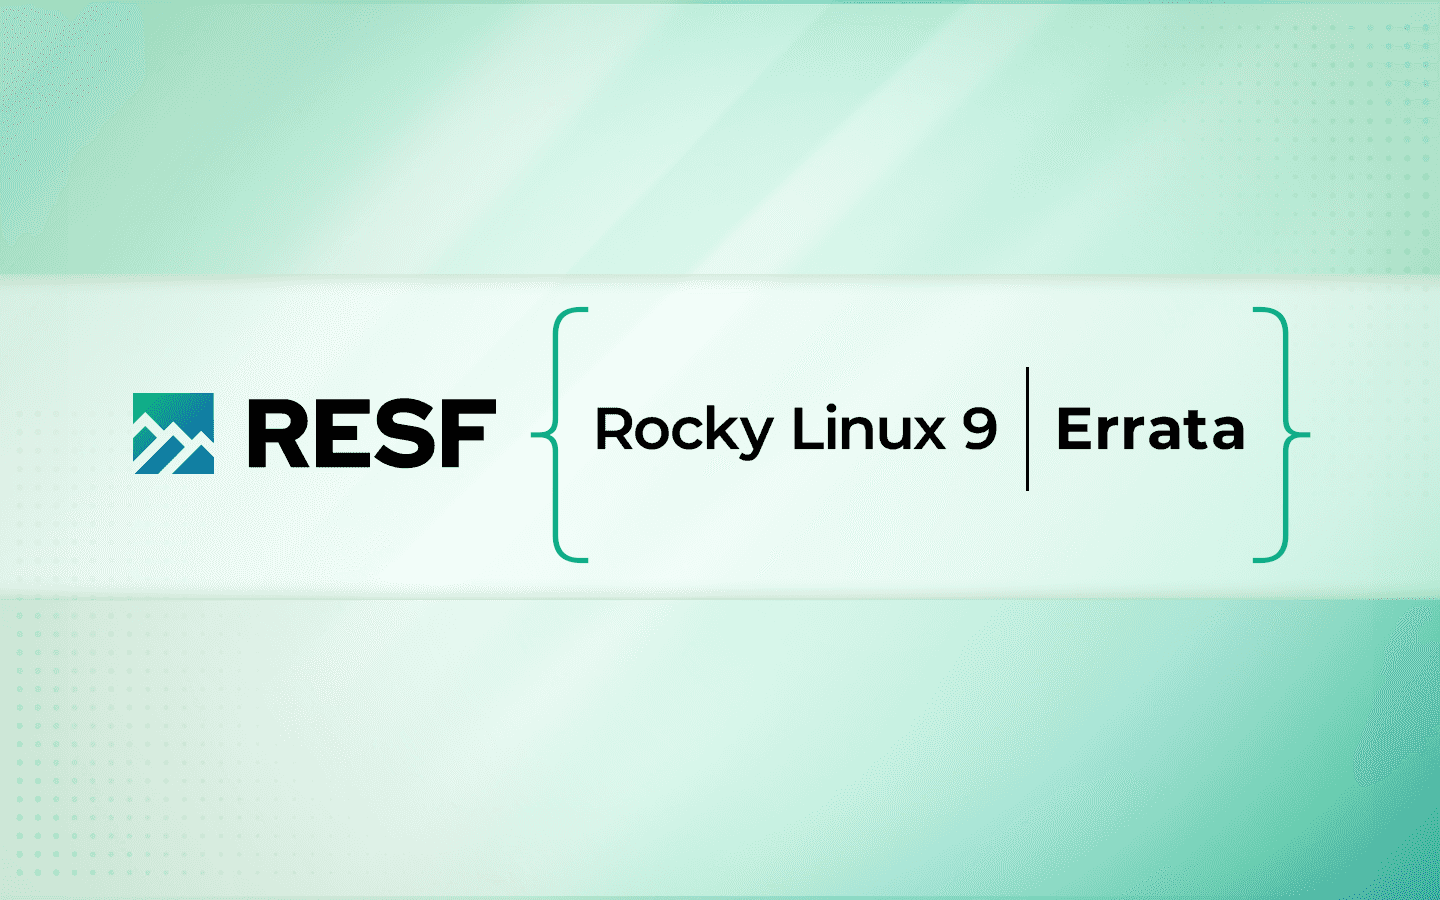 Rocky Linux 9 Errata Subsystem Released as Open Source Project